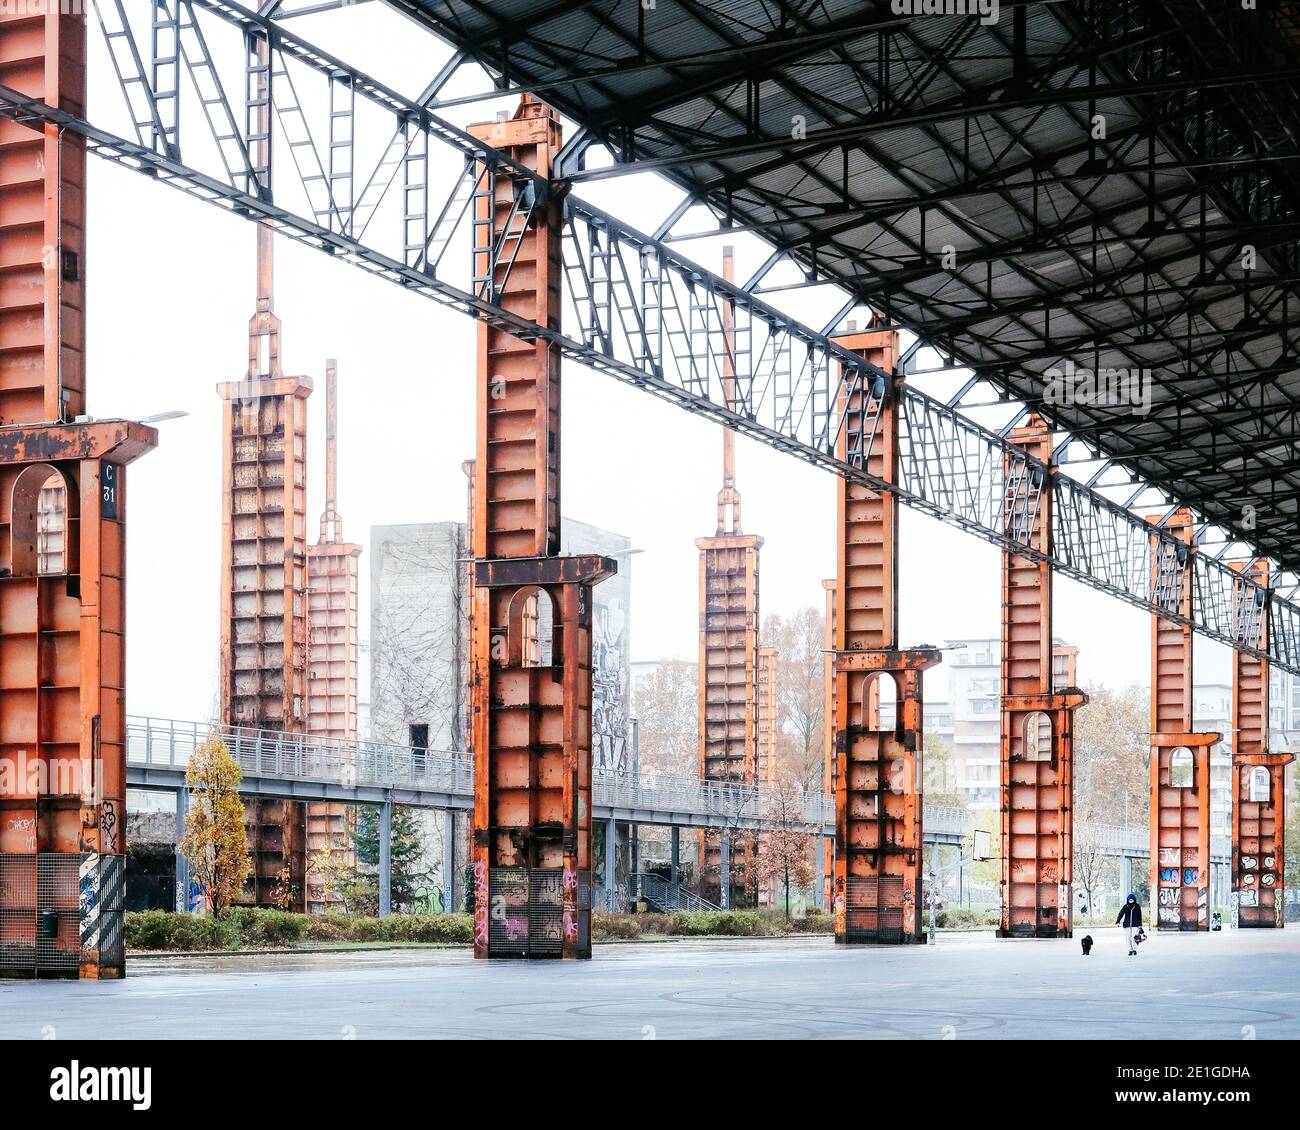 Parco Dora, Turin, Italy, with the huge structure of hall of the former Vitali steel mills 30-metre high red steel columns. Stock Photo